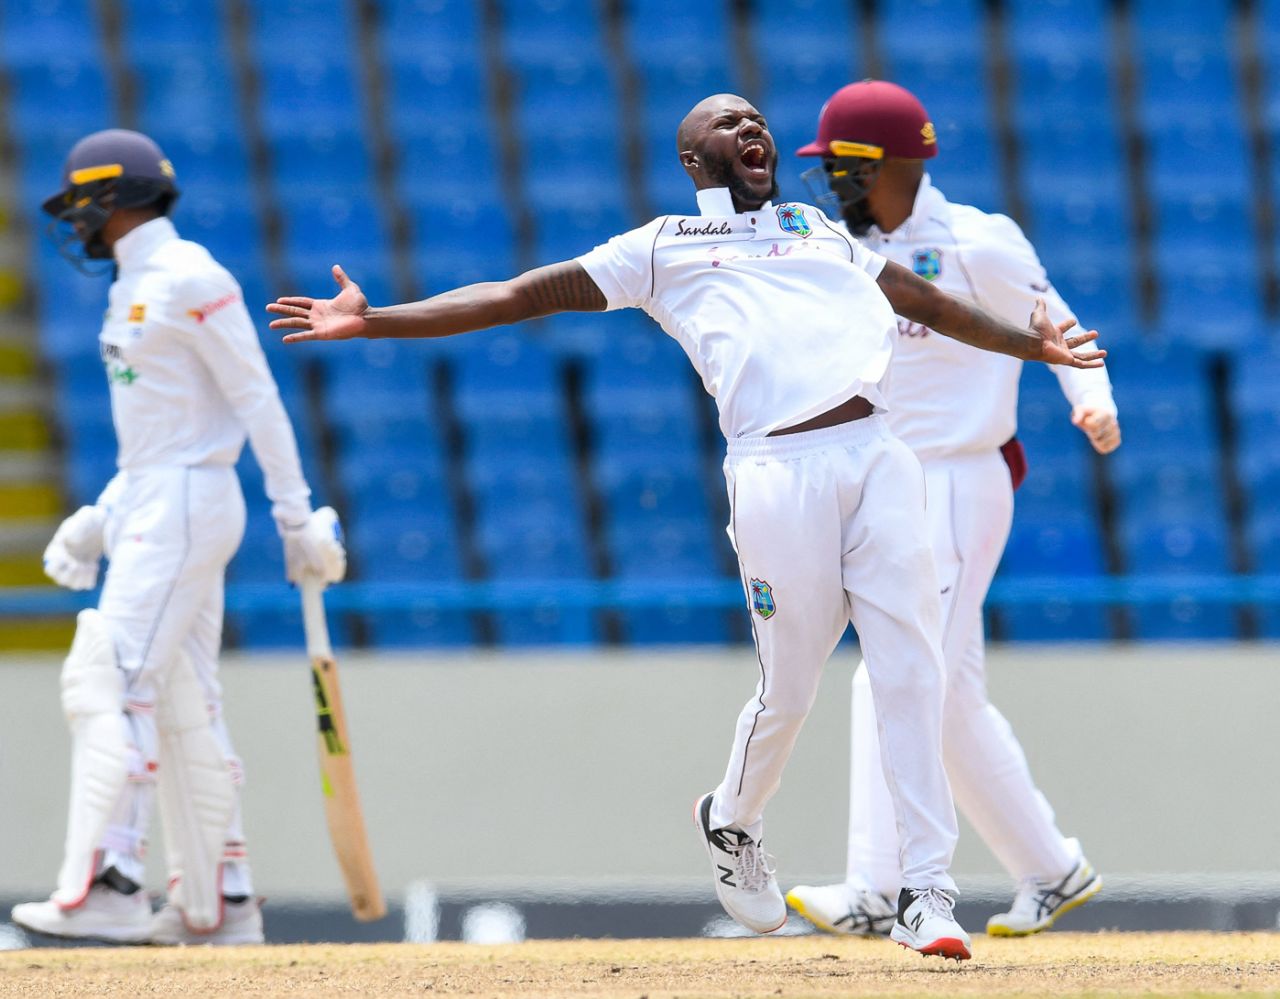 Jermaine Blackwood belts out a successful lbw appeal to dismiss Dhananjaya de Silva, West Indies vs Sri Lanka, 2nd Test, North Sound, 3rd day, March 31, 2021